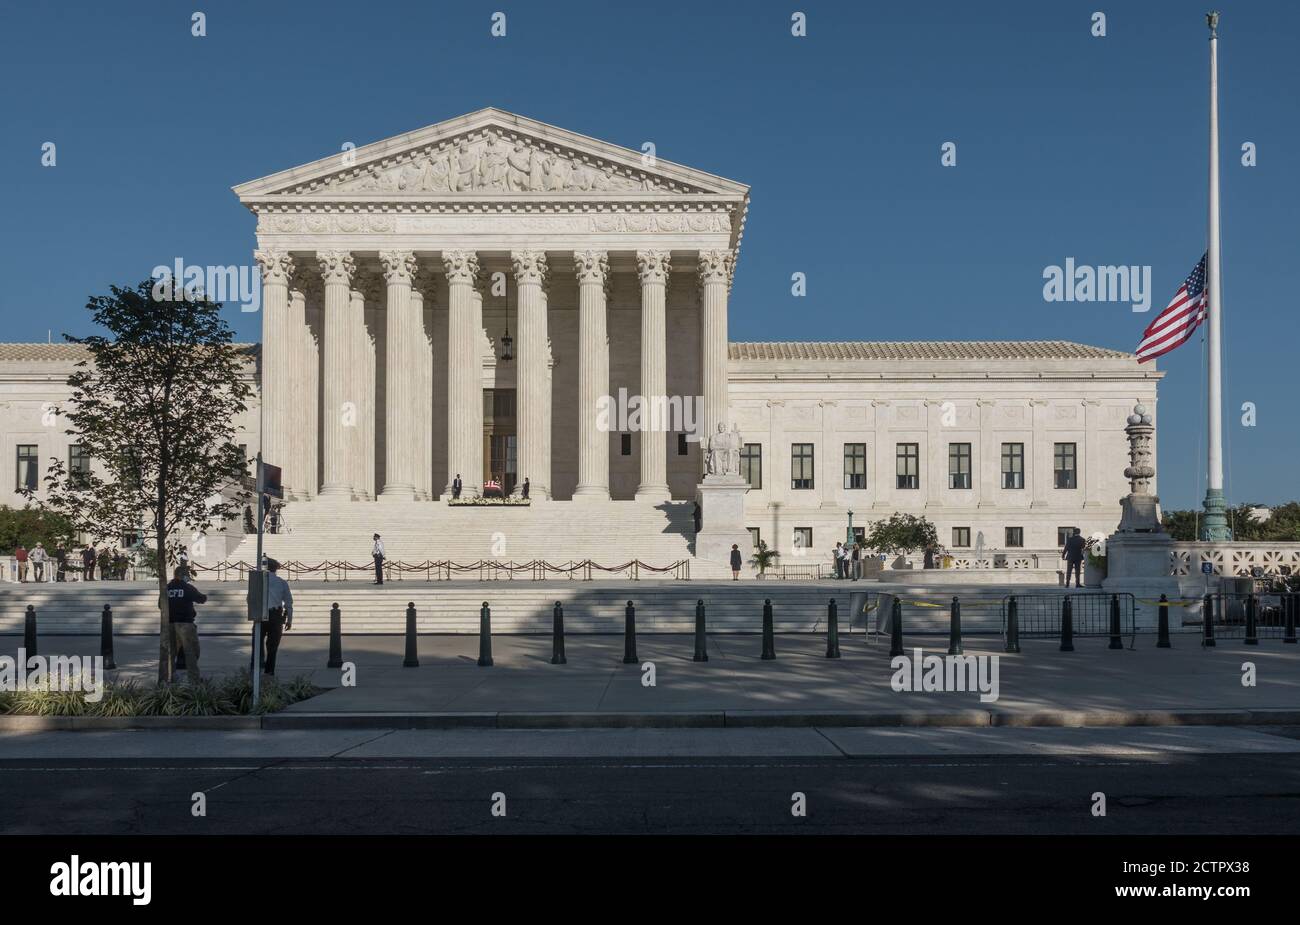 Sept. 23, 2020 - The casket of Supreme Court Justice Ruth Bader Ginsburg ion repose under the portico of the Supreme Court building, flag at half staff, awaiting a flow of mourners to pay their respects. Stock Photo